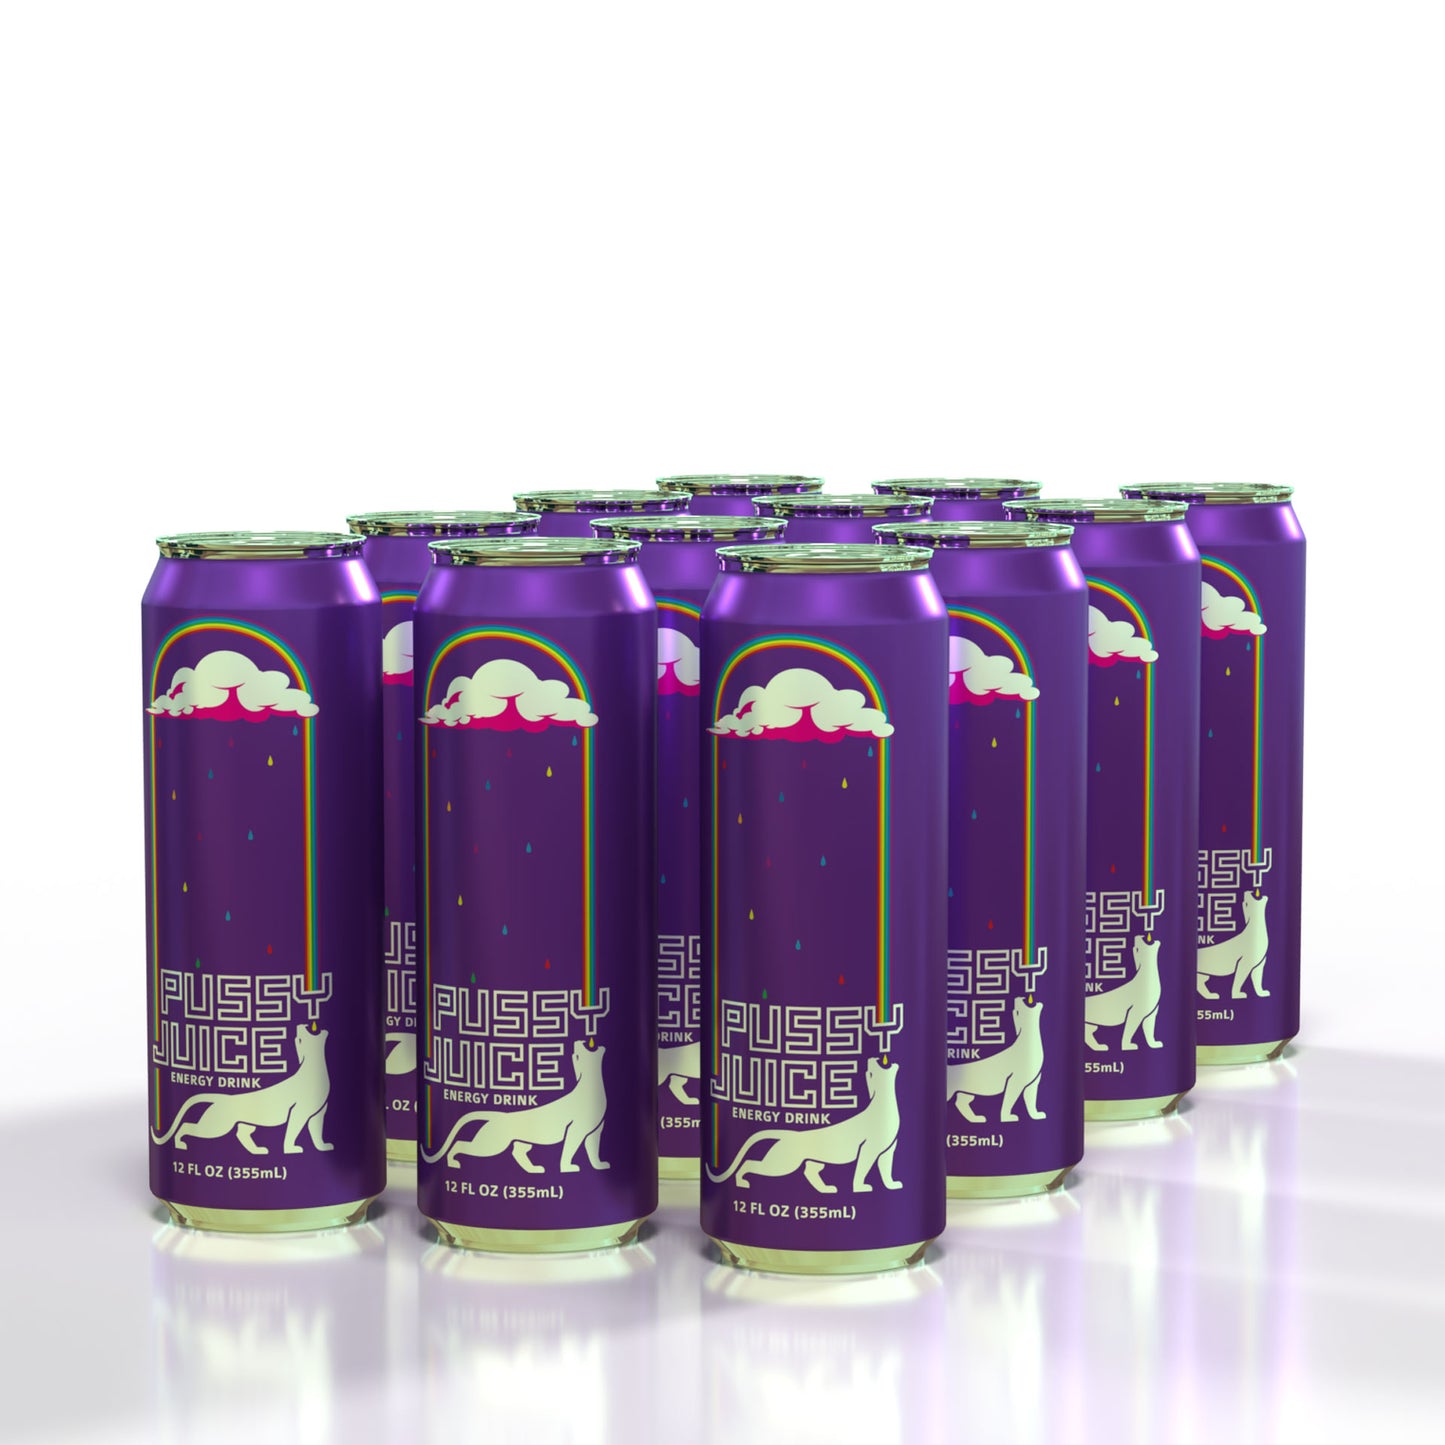 12 Pack of Pussy Juice energy drinks